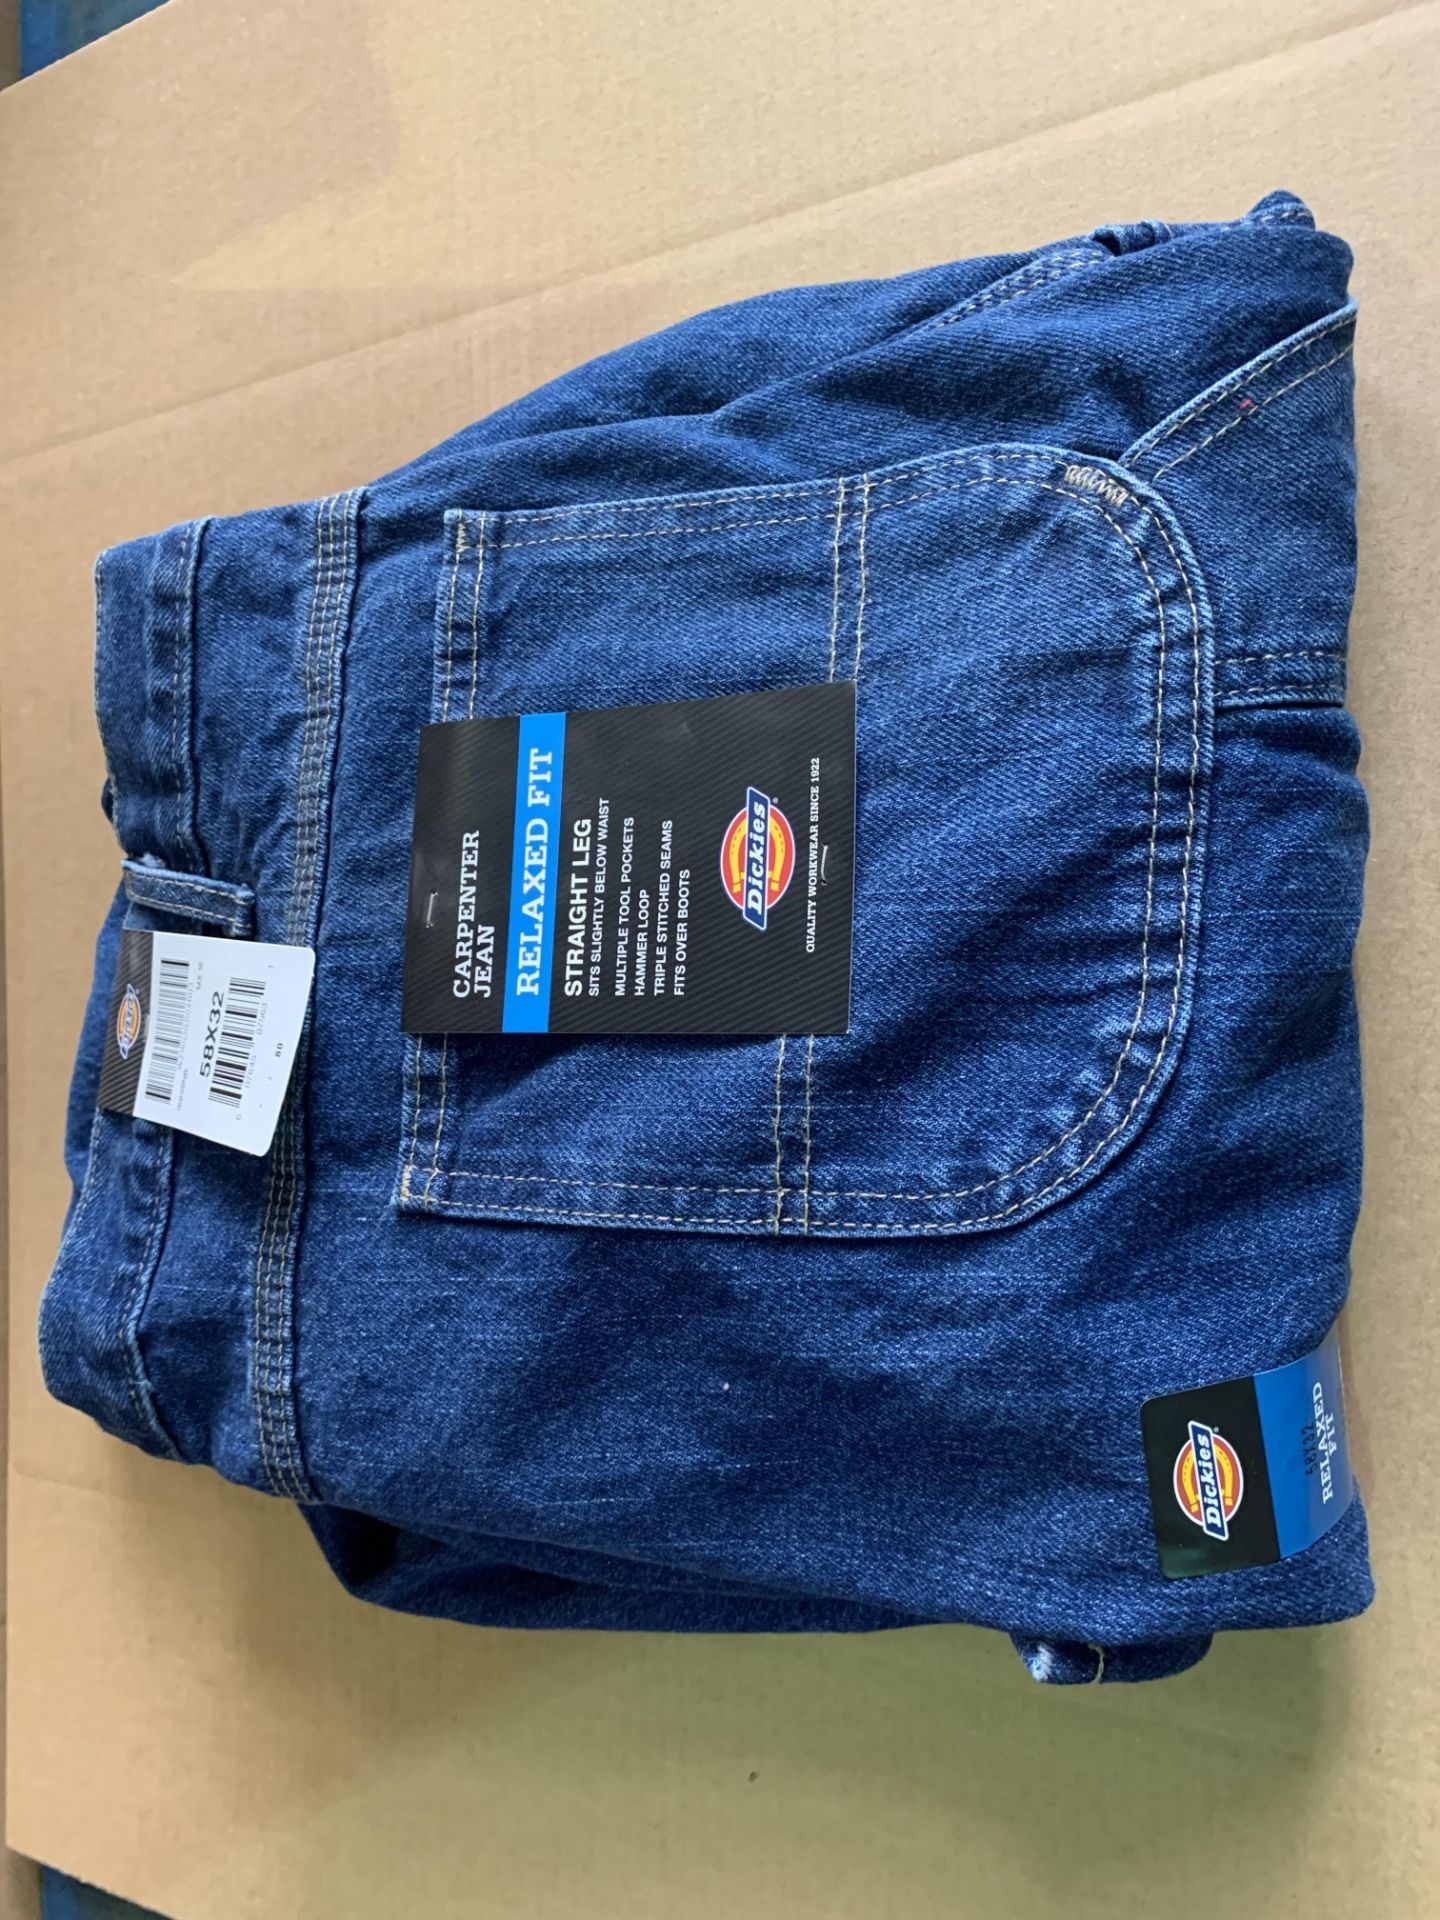 6 X BRAND NEW DICKIES RELAXED FIT STRAIGHT LEG CARPENTER JEANS SIZE 58 X 32 (716/1)